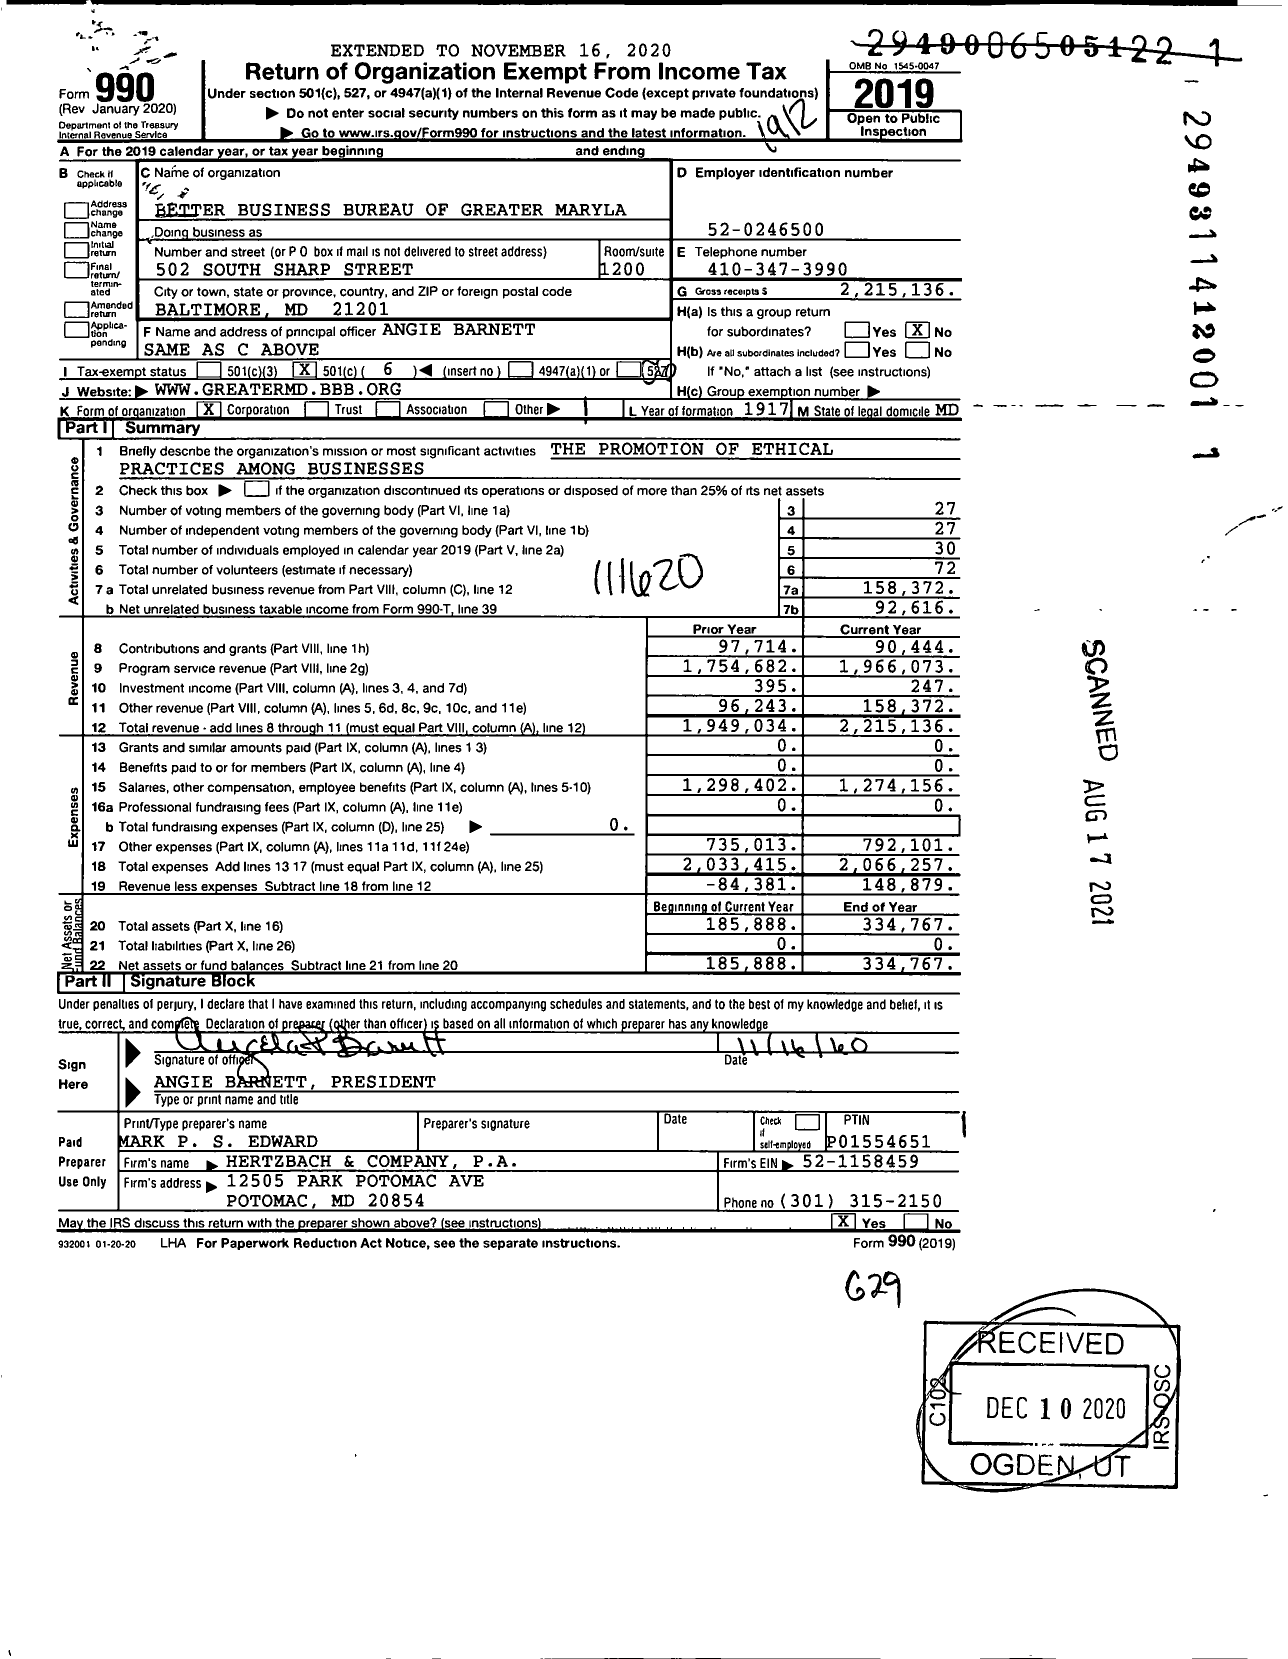 Image of first page of 2019 Form 990O for Better Business Bureau of Greater Maryland (BBB)